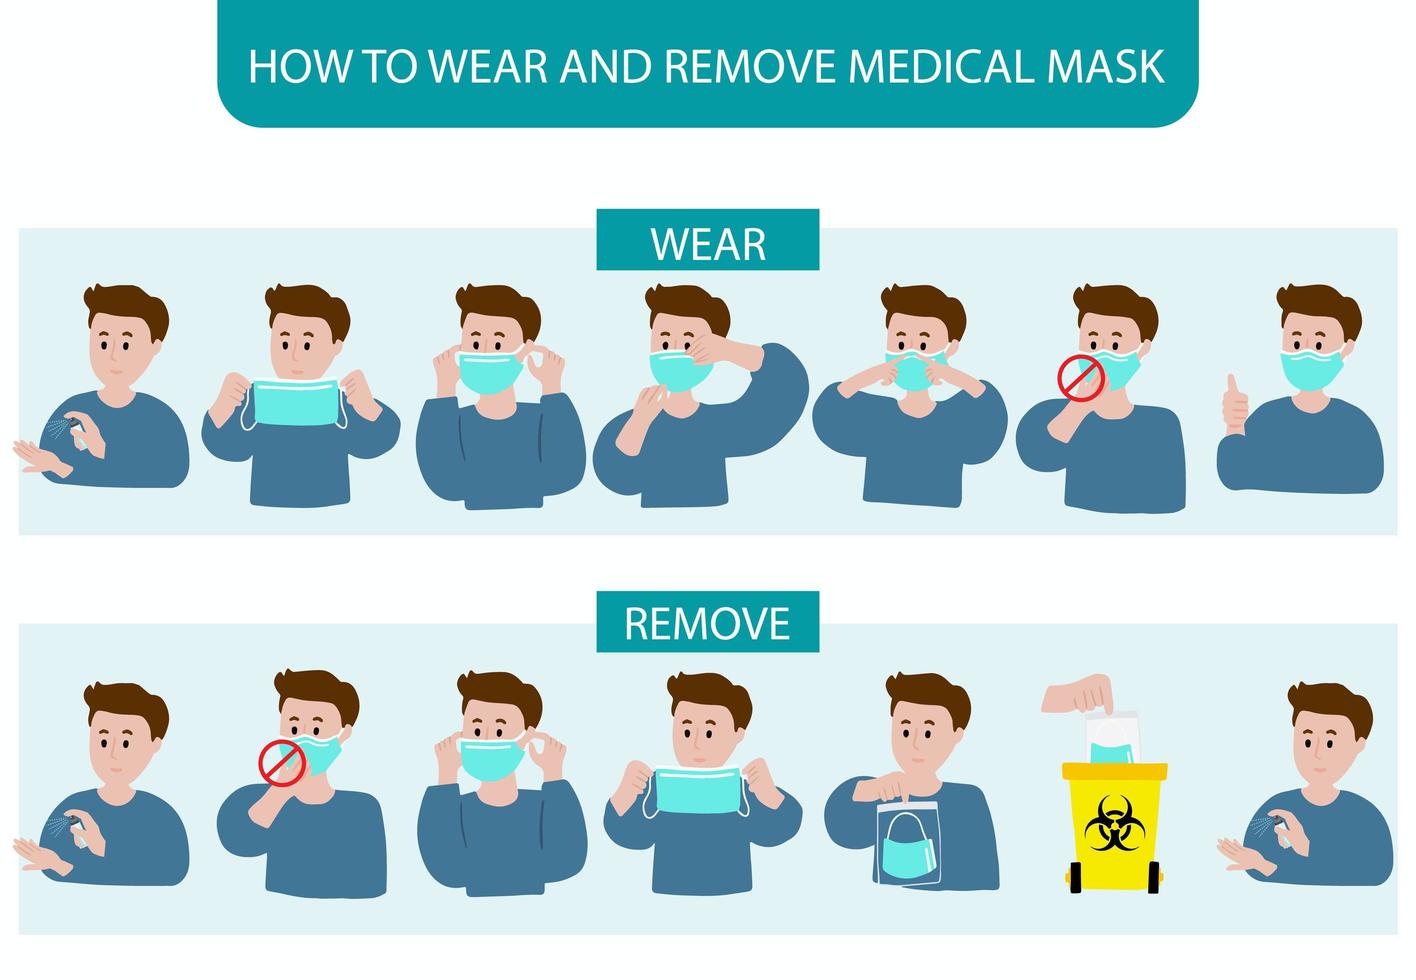 How to wear and remove face mask step by step poster  vector